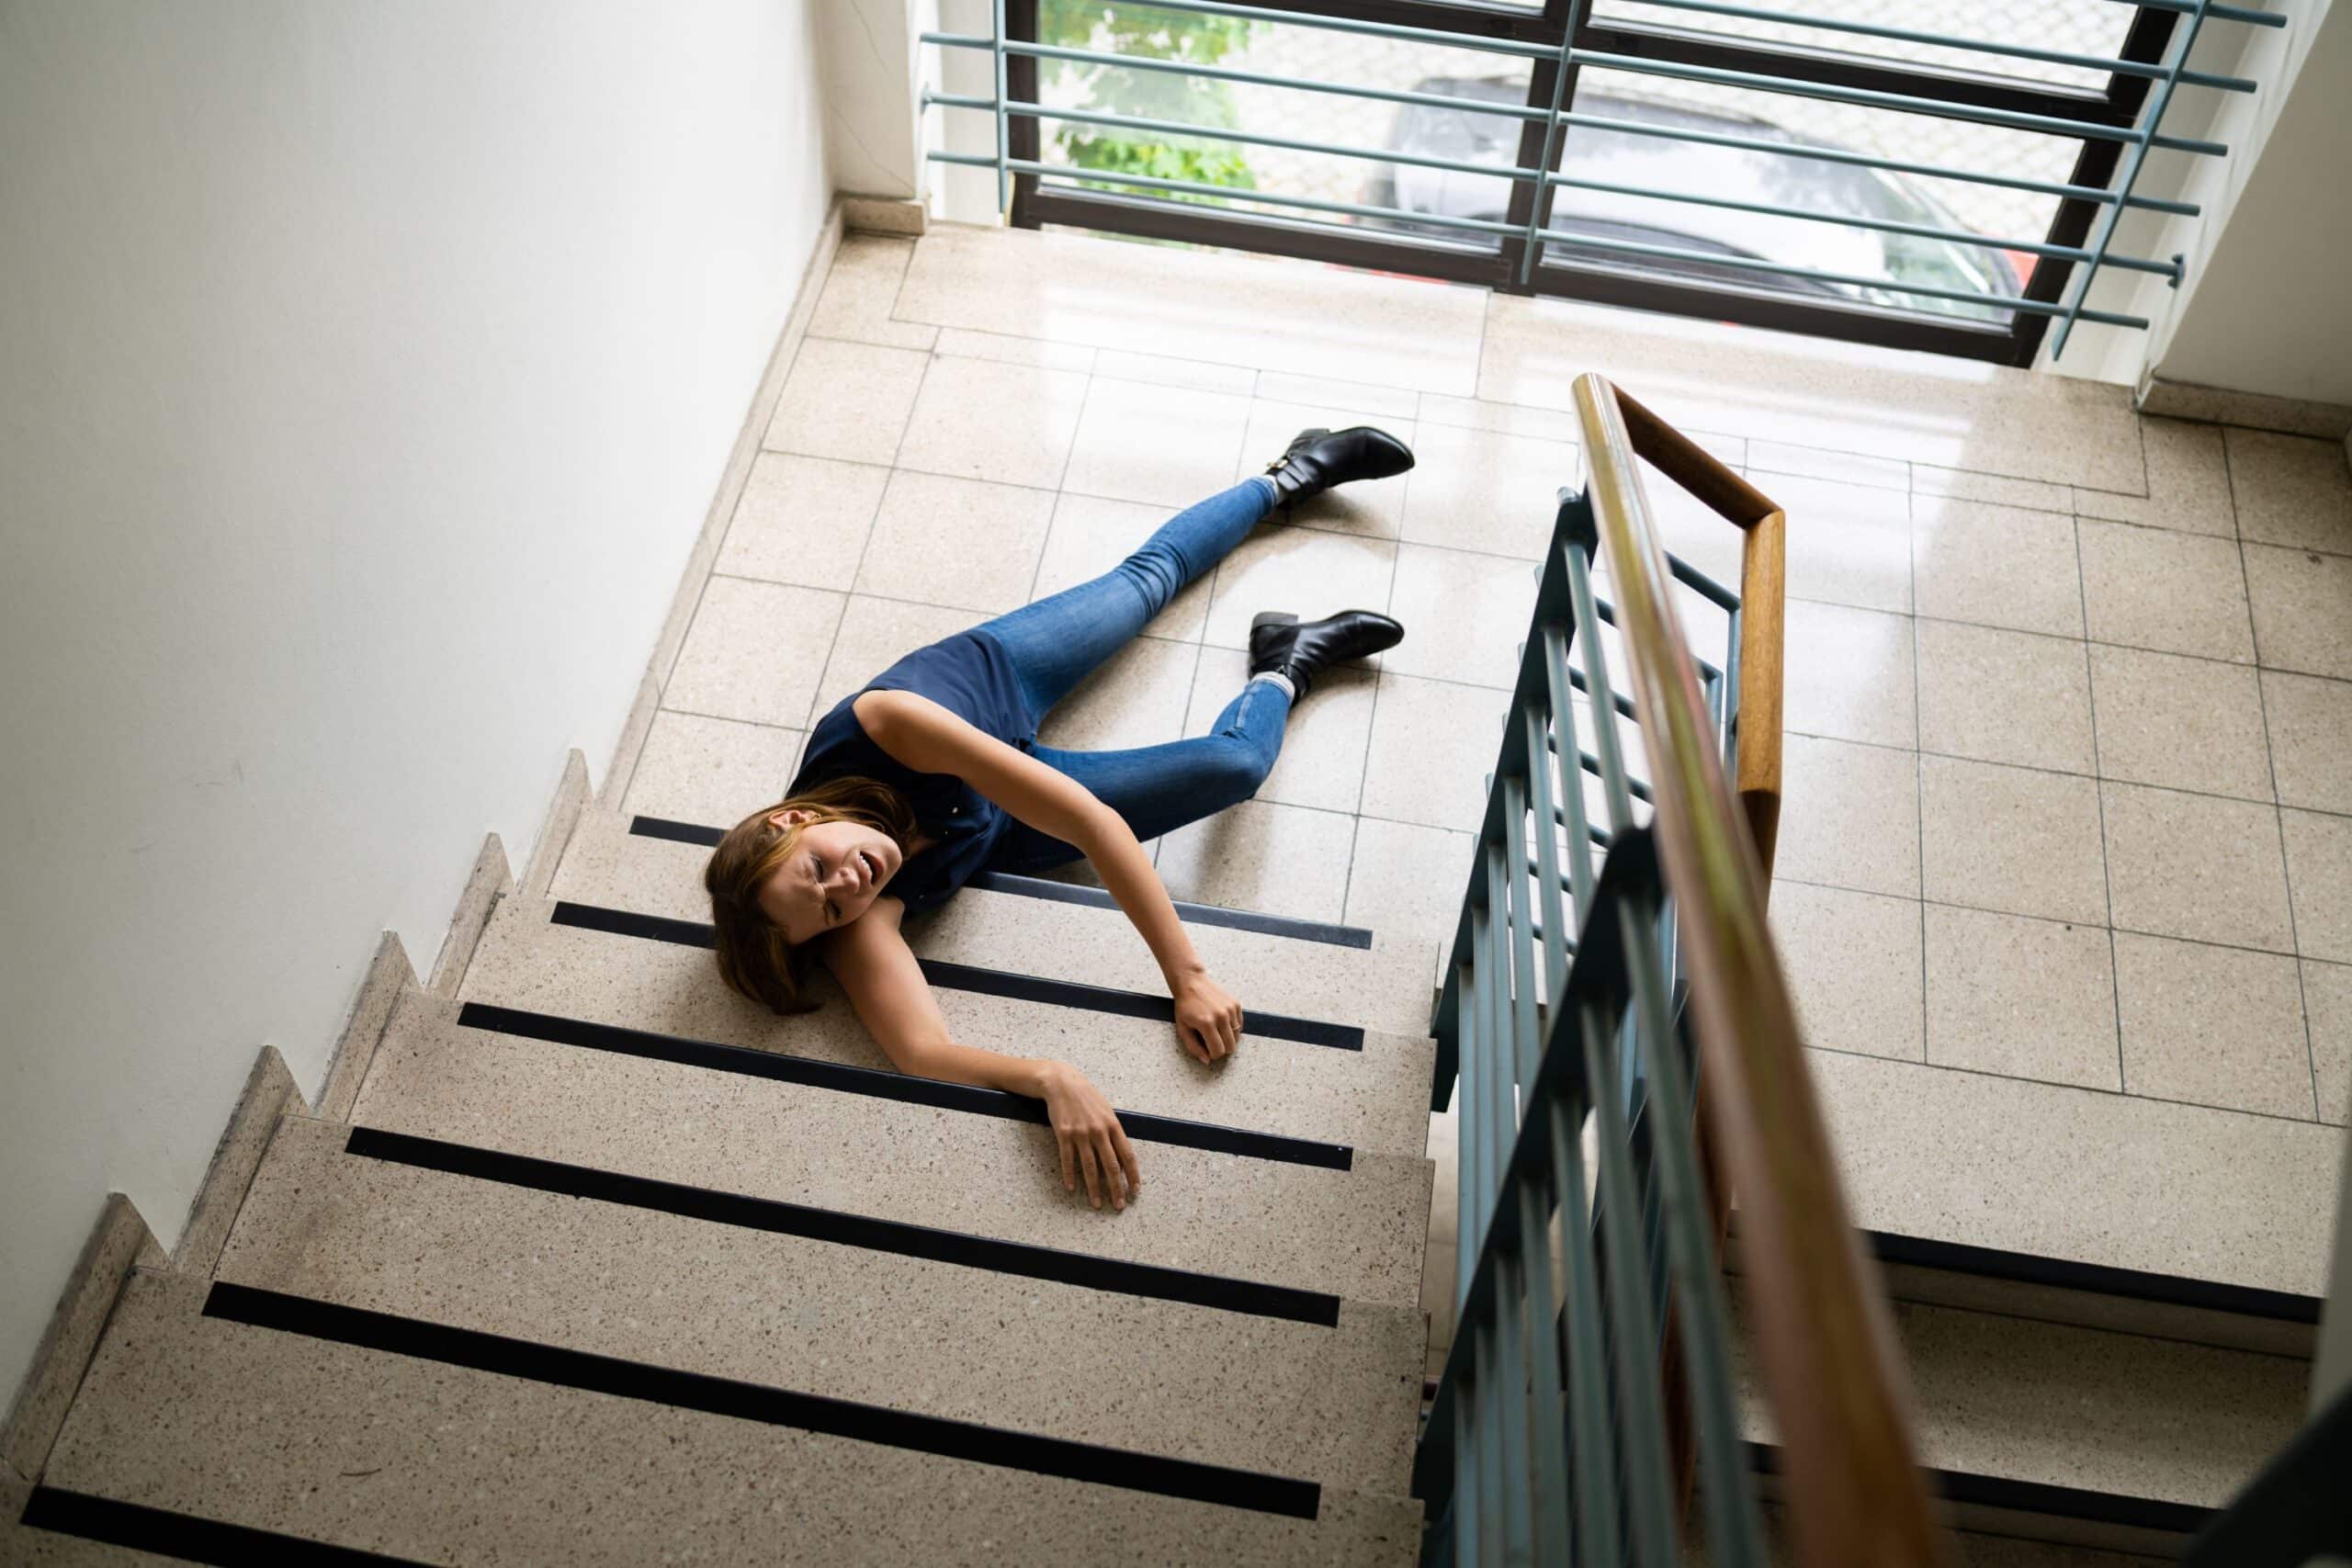 FOrt Lauderdale Slip and Fall Lawyer